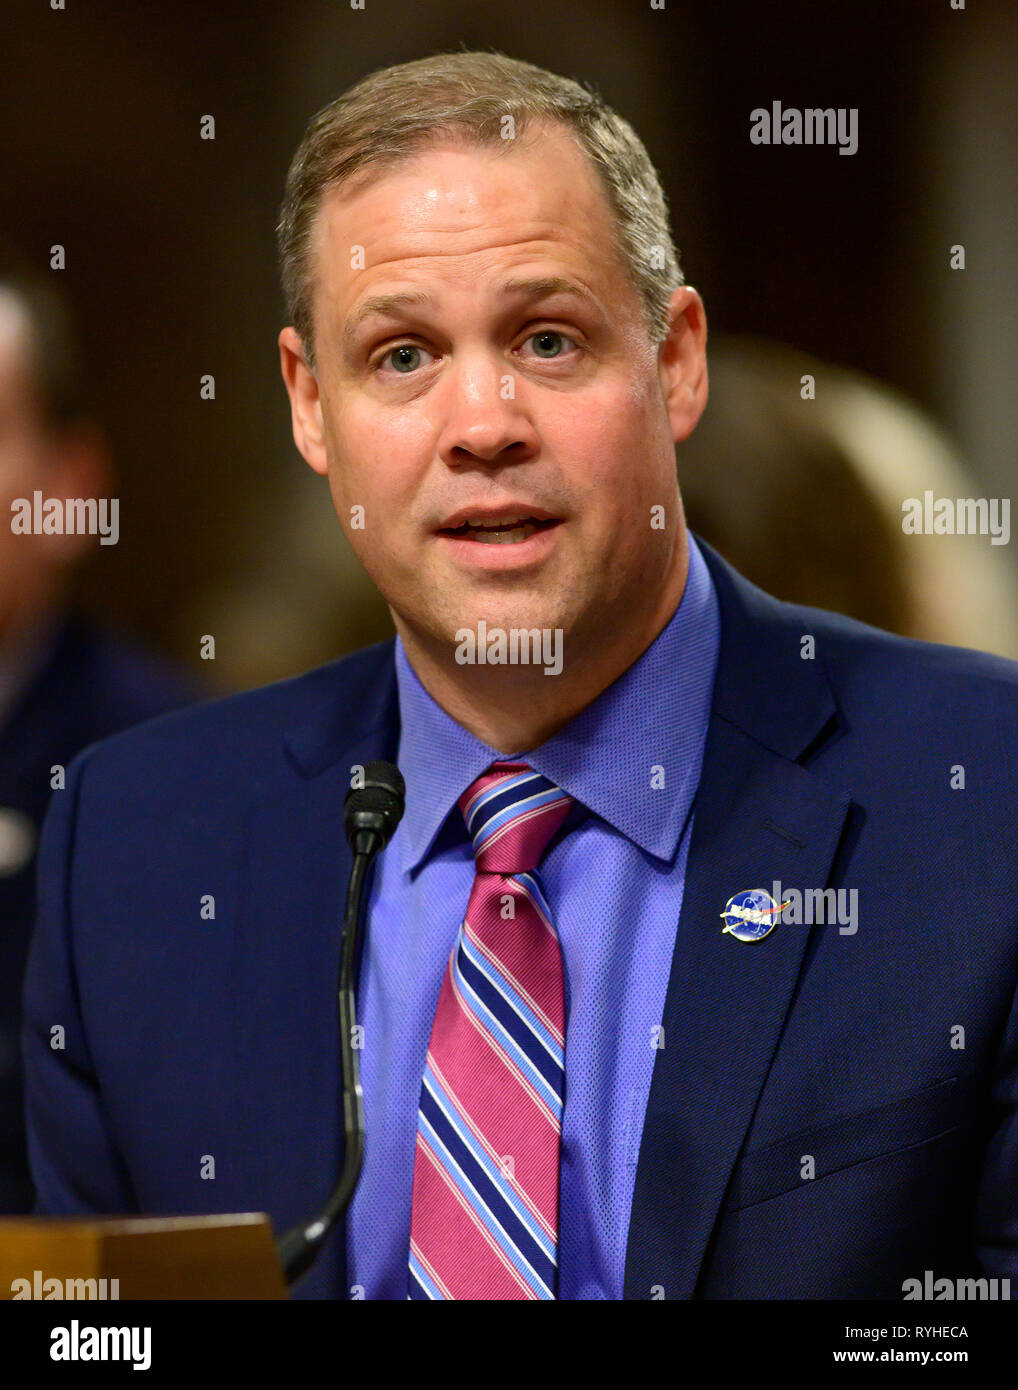 Jim Bridenstine, Administrator, National Aeronautics and Space Administration, testifies before the United States Senate Committee on Commerce, Science, and Transportation on 'The New Space Race: Ensuring U.S. Global Leadership on the Final Frontier' on Capitol Hill in Washington, DC on Wednesday, March 13, 2019. Credit: Ron Sachs/CNP /MediaPunch Stock Photo